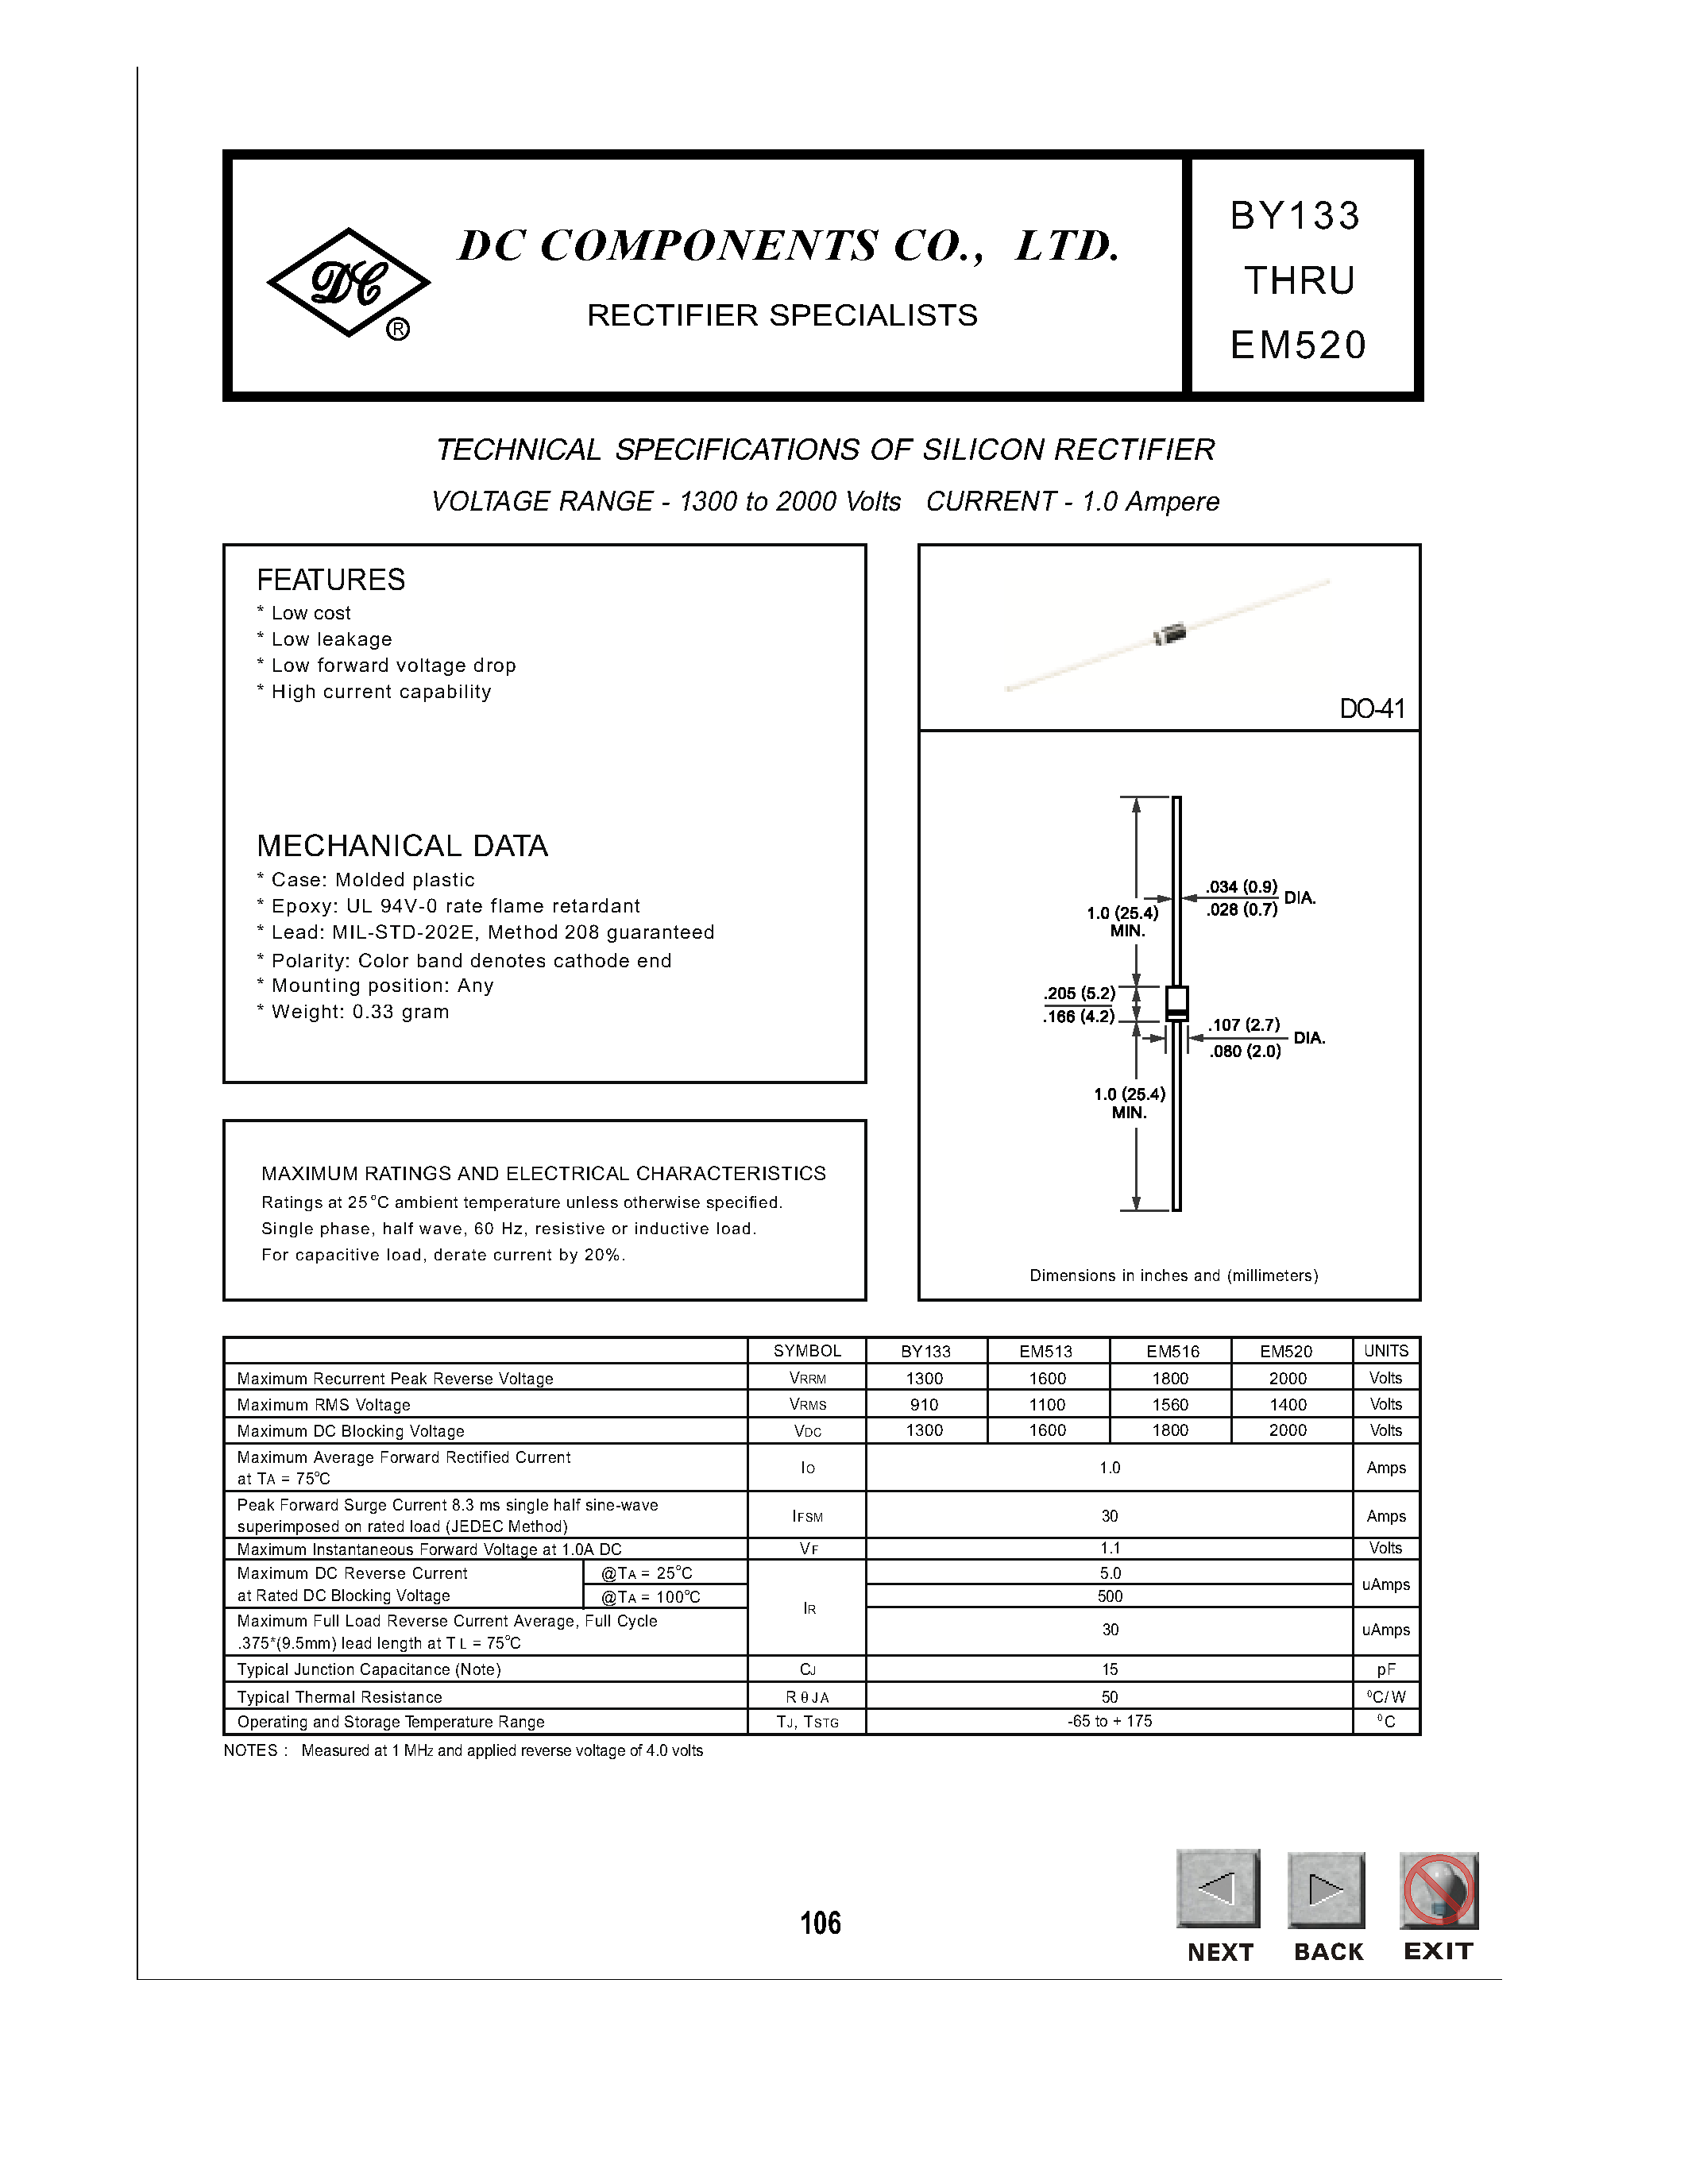 Datasheet BY133 - TECHNICAL SPECIFICATIONS OF SILICON RECTIFIER page 1